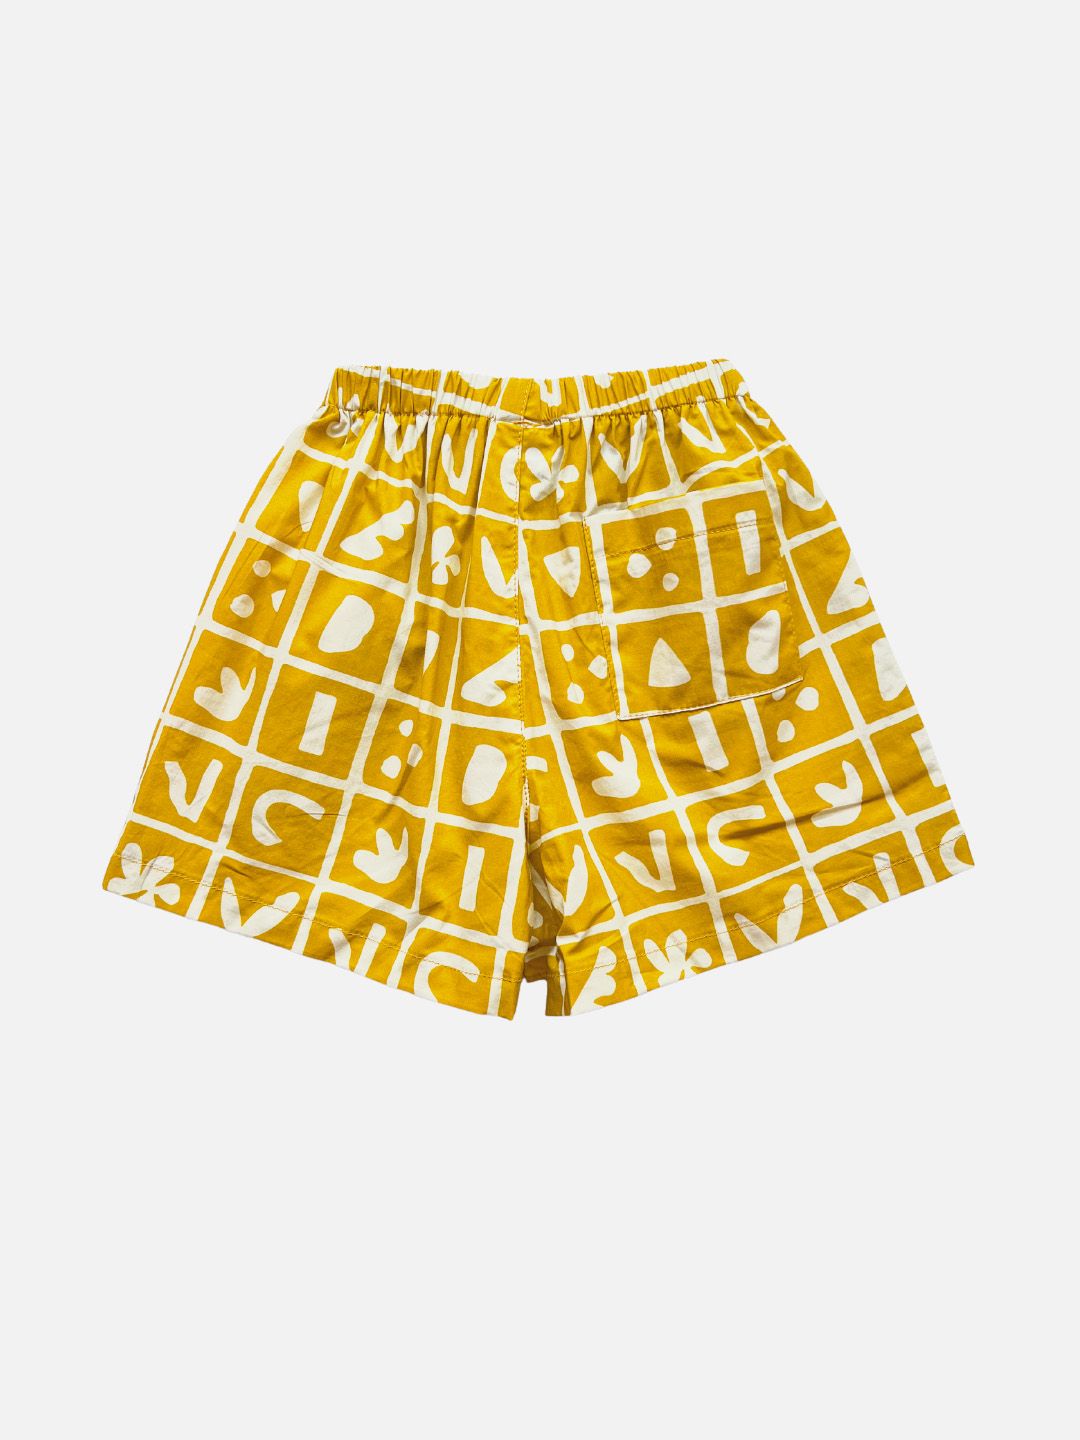 A pair of kids' shorts in mustard yellow, overlaid with a grid of different shapes in white, with back pocket, rear view